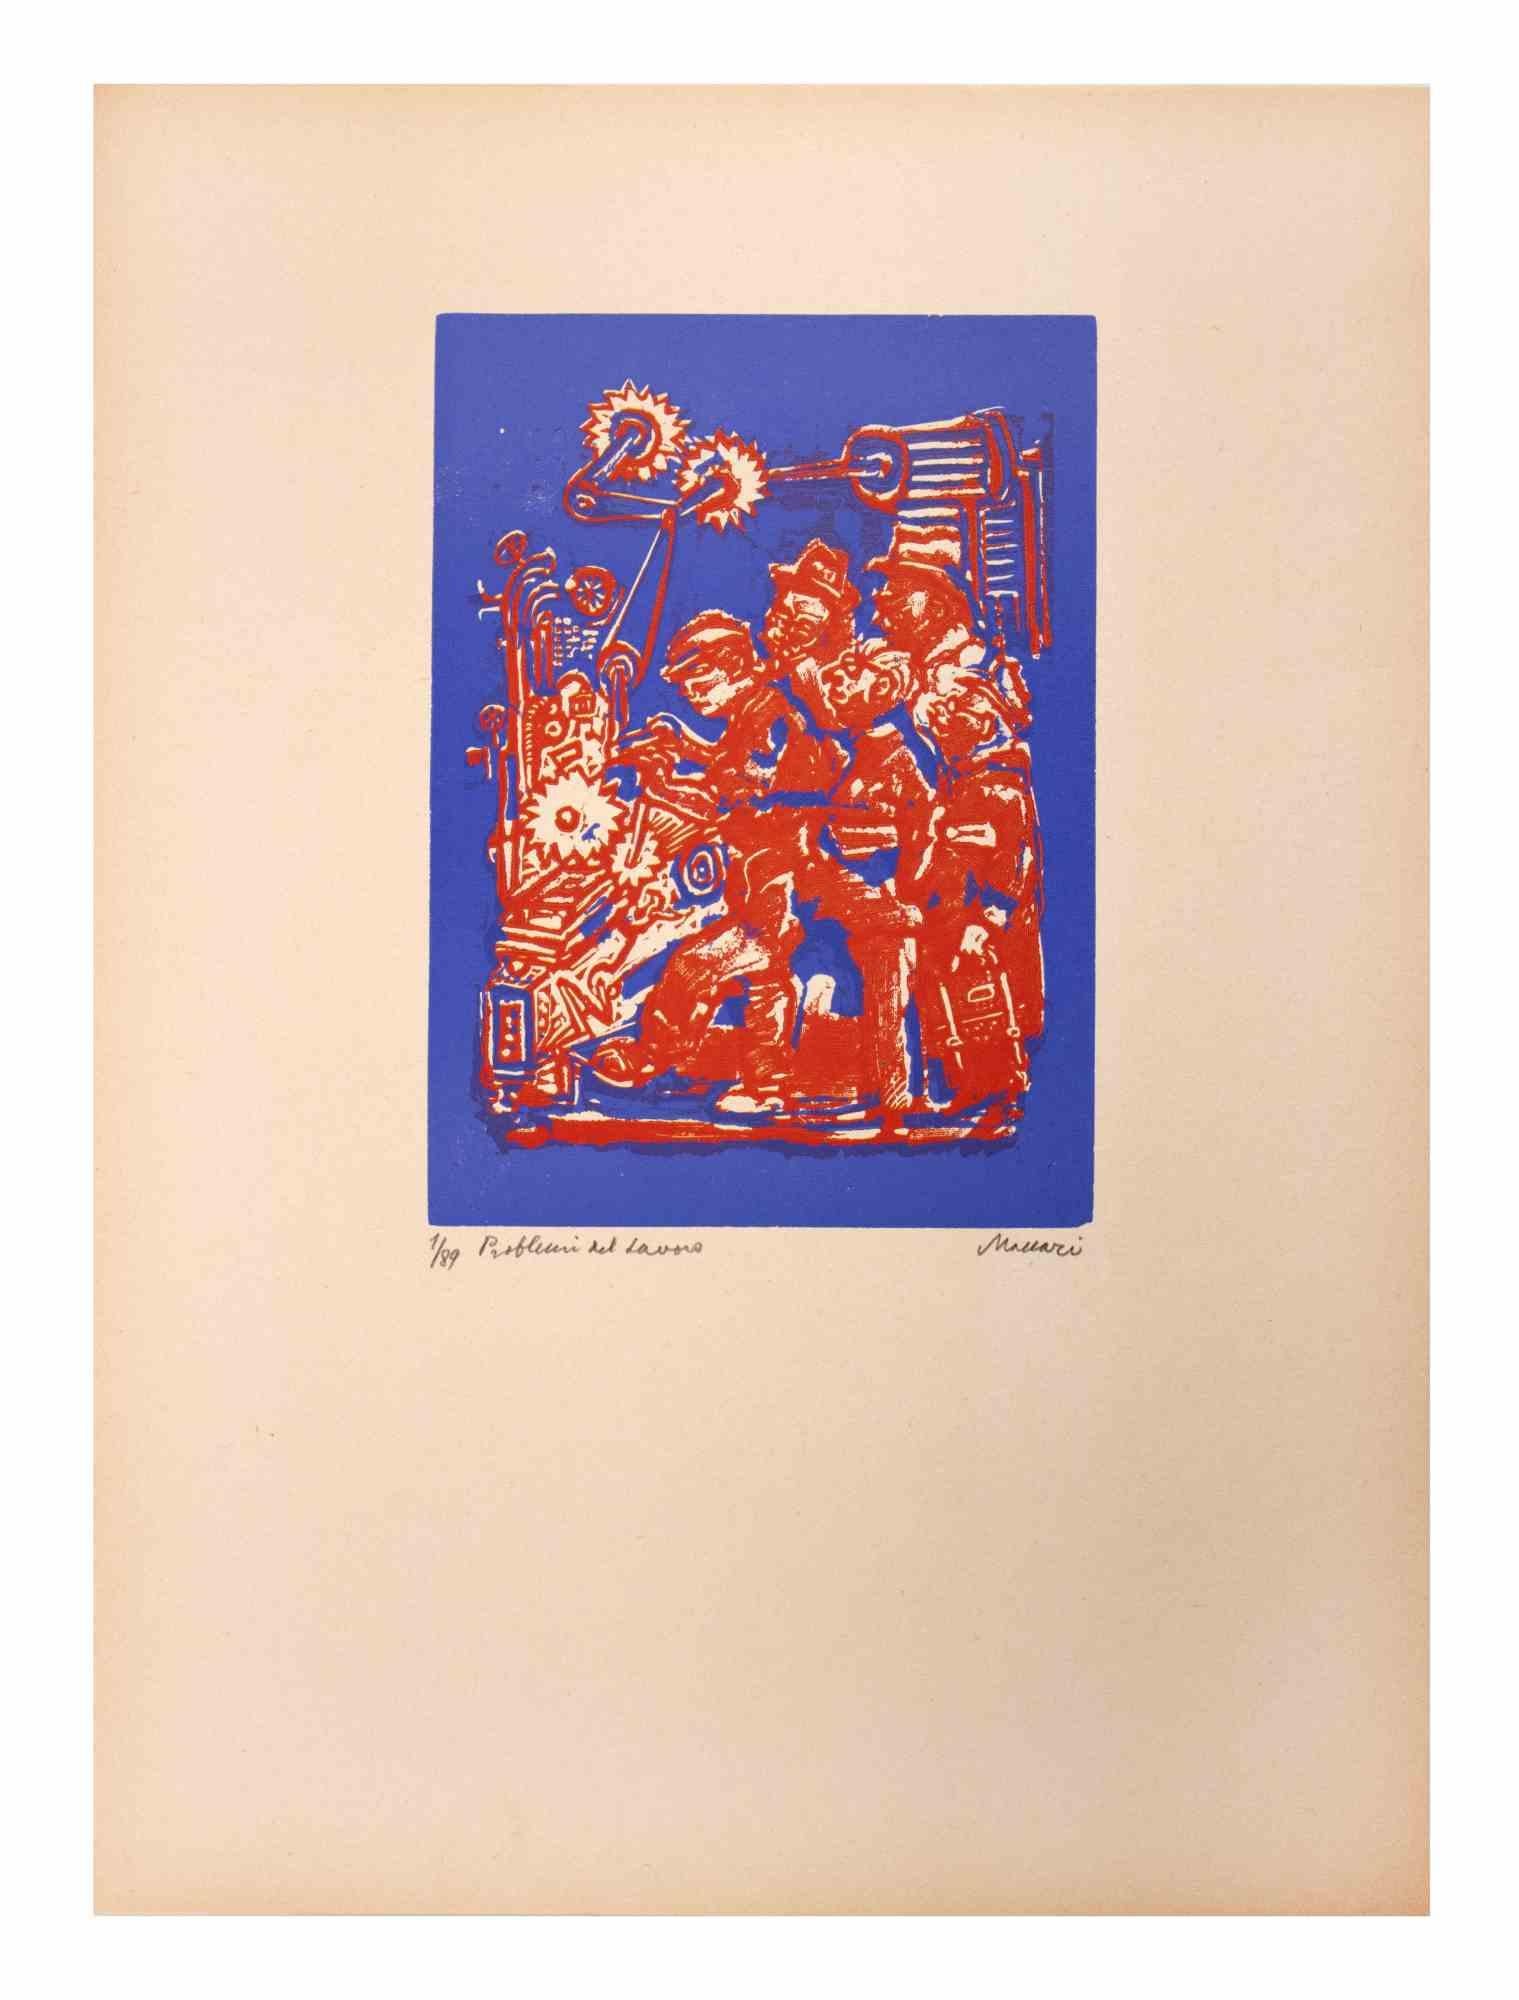 Work problems is an Artwork realized by Mino Maccari  (1924-1989) in the Mid-20th Century.

Colored woodcut on paper. Hand-signed on the lower, numbered 1/89 specimens and titled on the left margin.

Good conditions.

Mino Maccari (Siena, 1924-Rome,